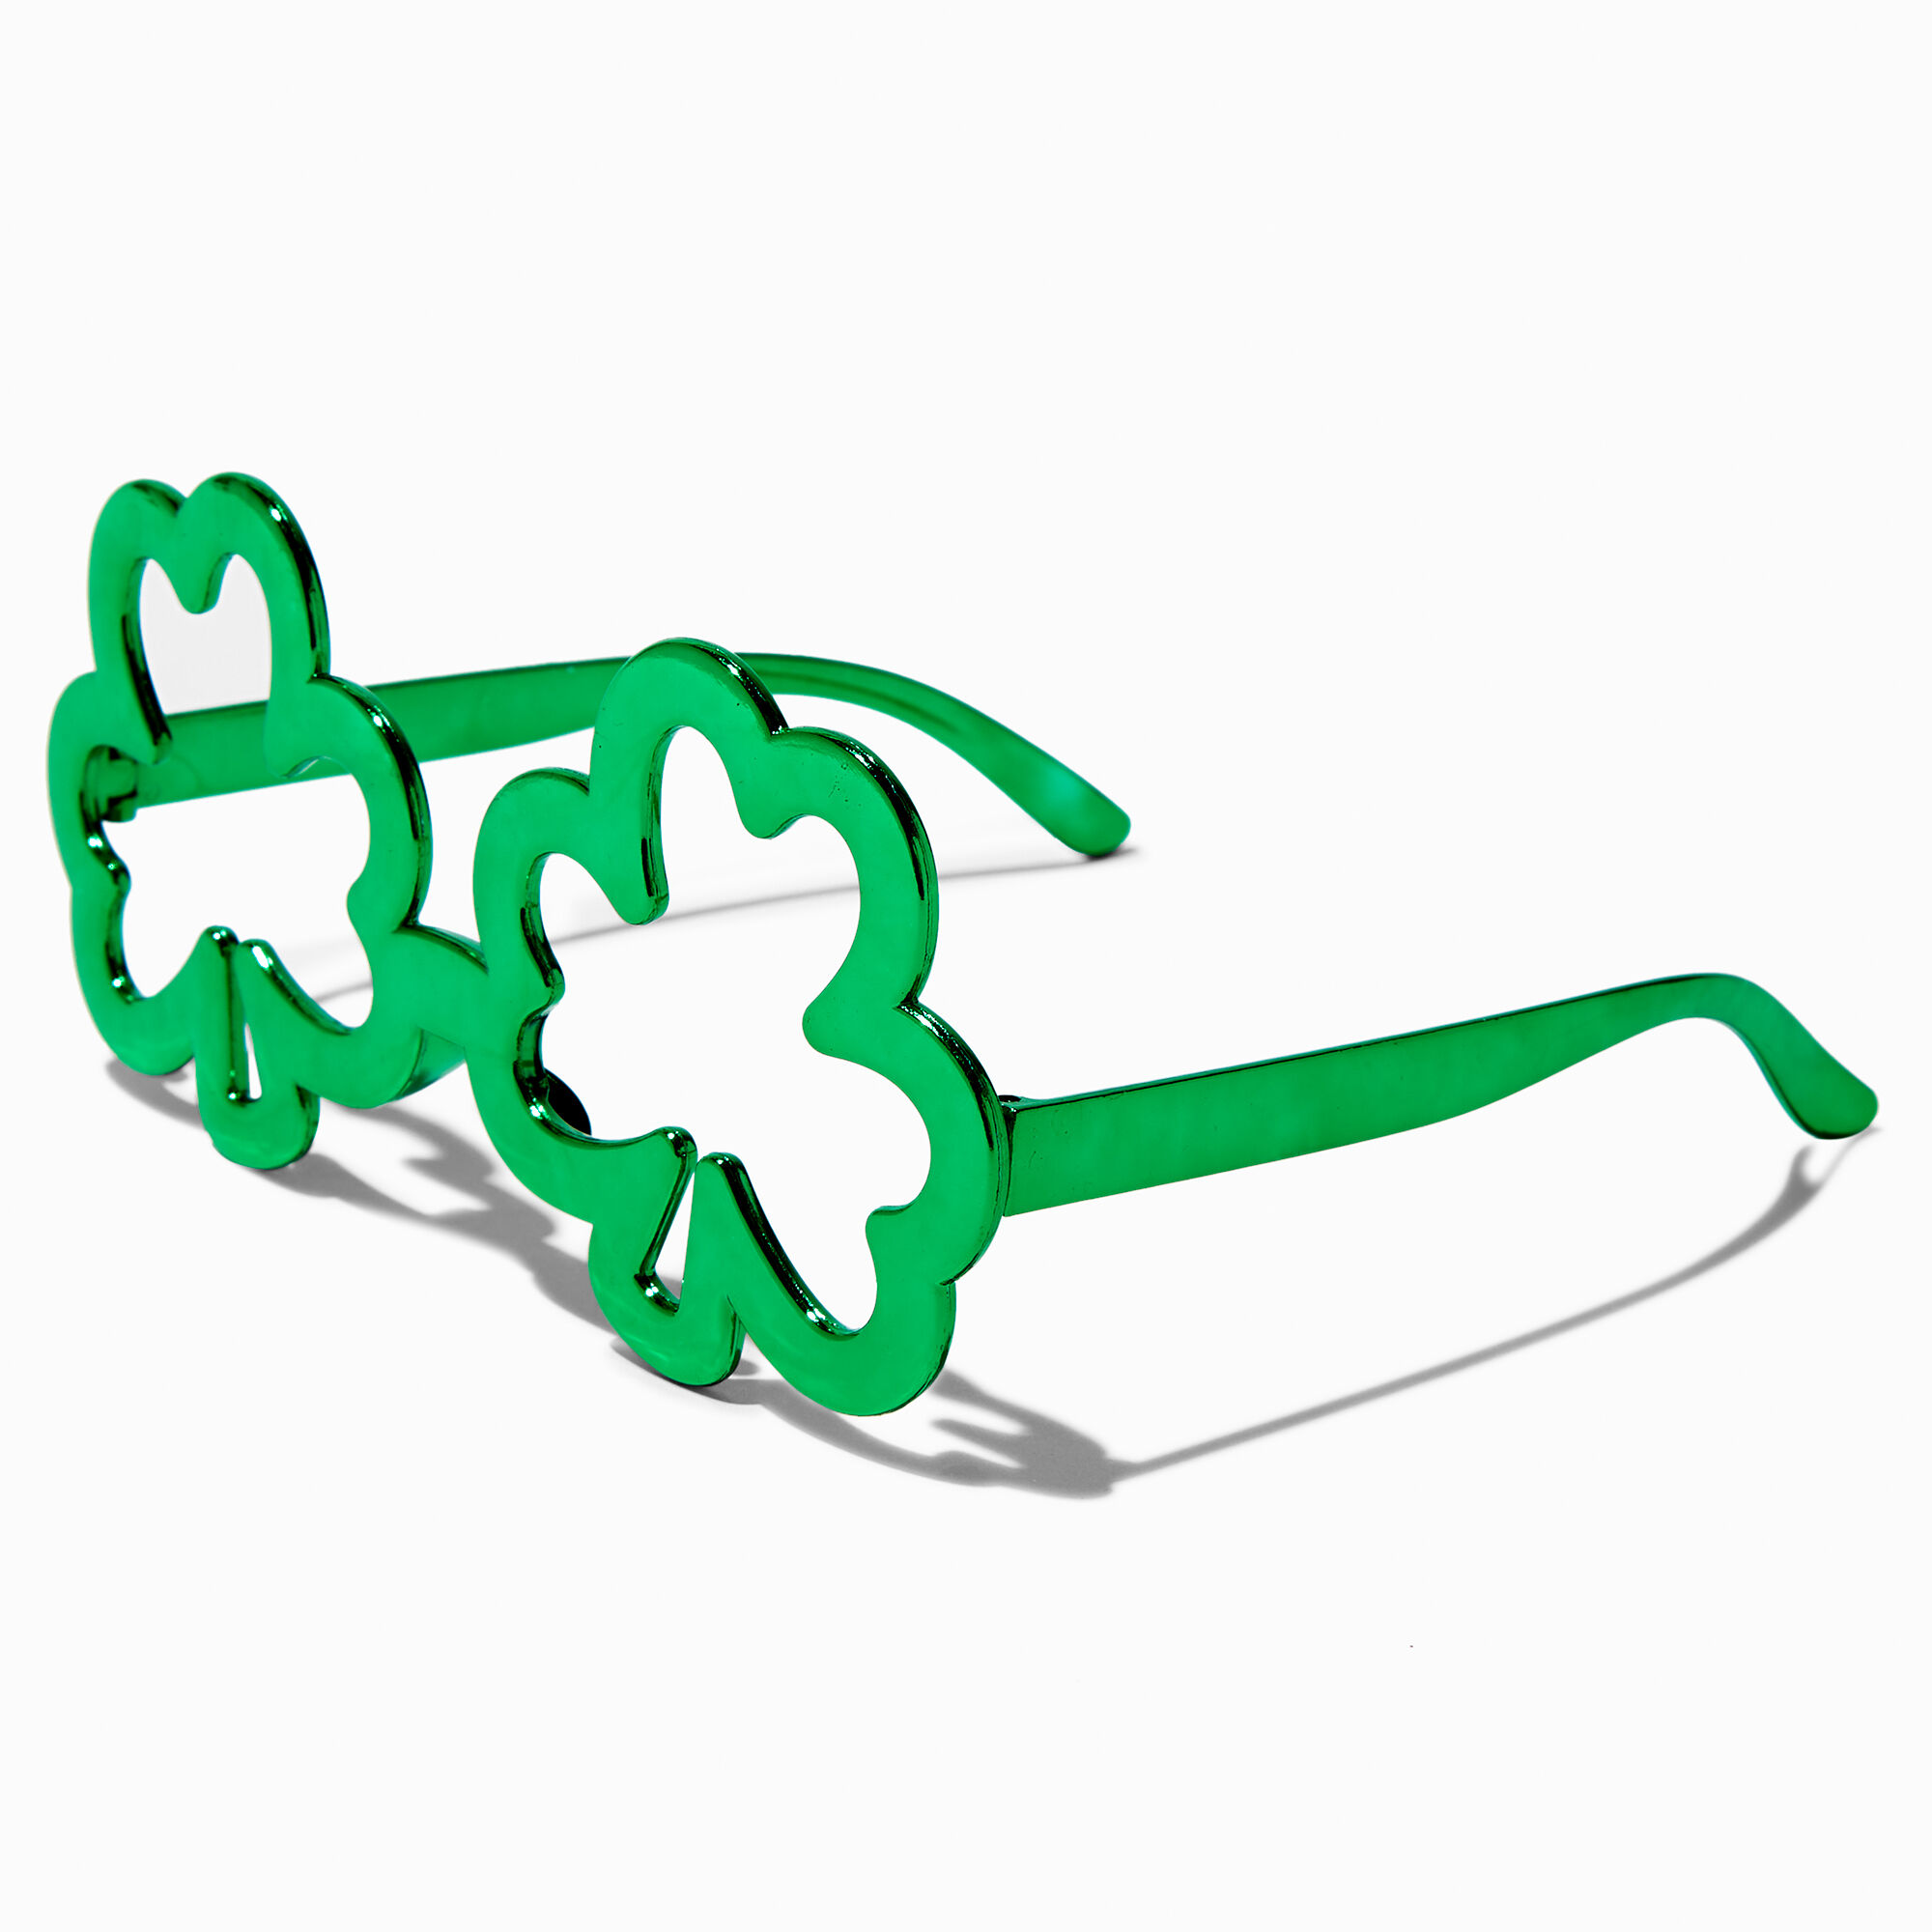 View Claires Shamrock Shaped Party Glasses information